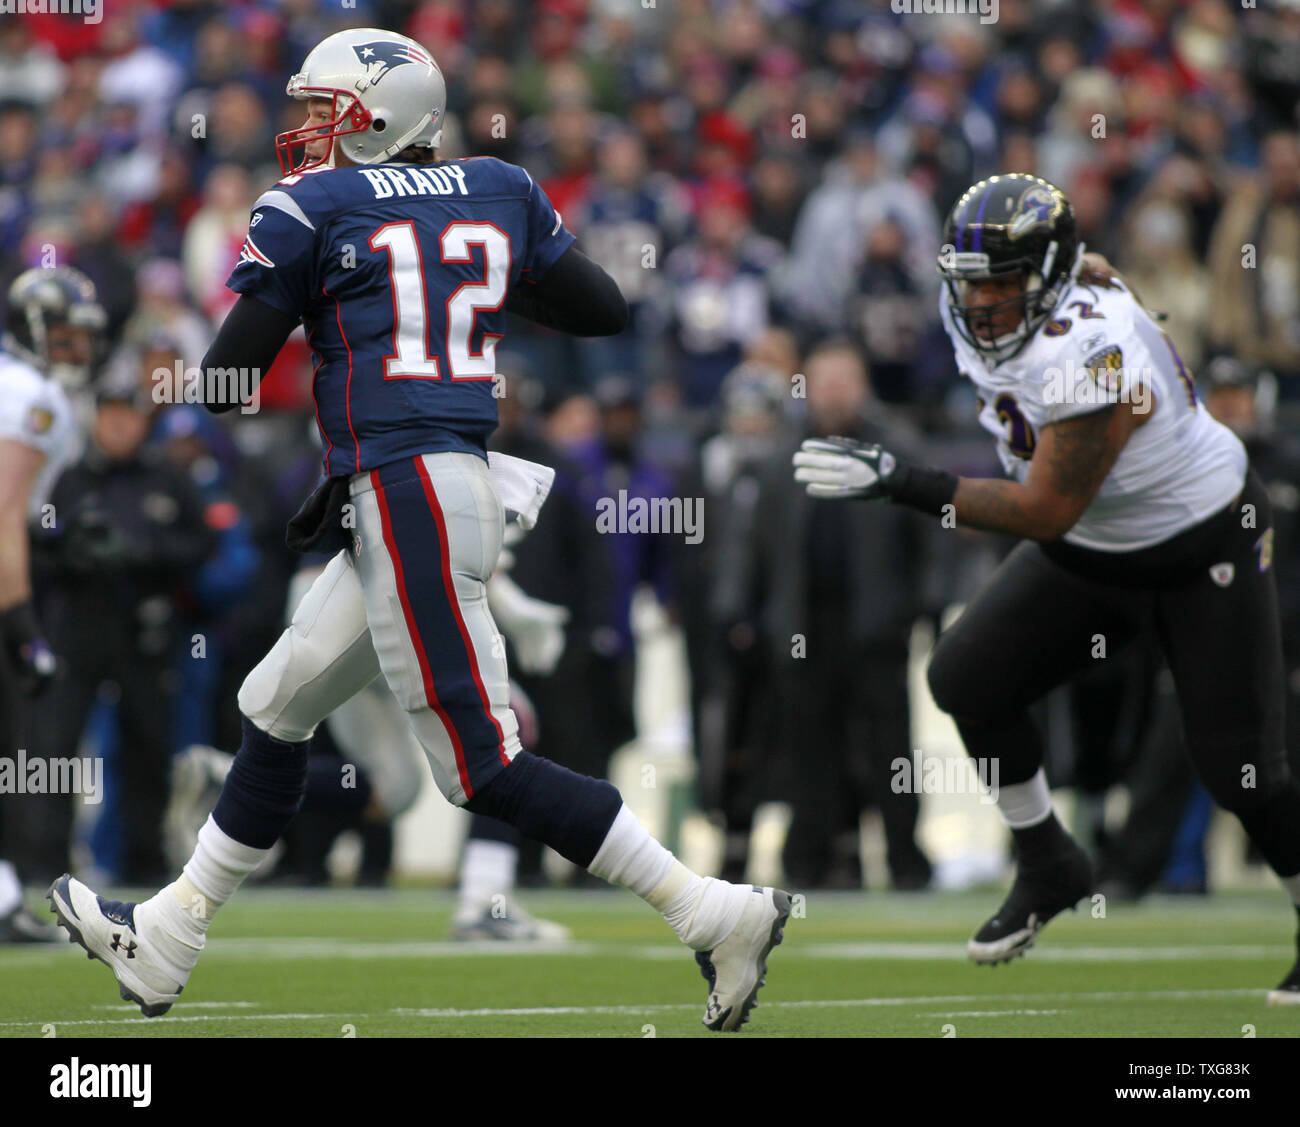 New England Patriots quarterback Tom Brady (12) scrambles from Baltimore Ravens nose tackle Terrence Cody (62) in the first quarter of the AFC Championship at Gillette Stadium in Foxboro, Massachusetts on January 22, 2012.   UPI/Matthew Healey Stock Photo